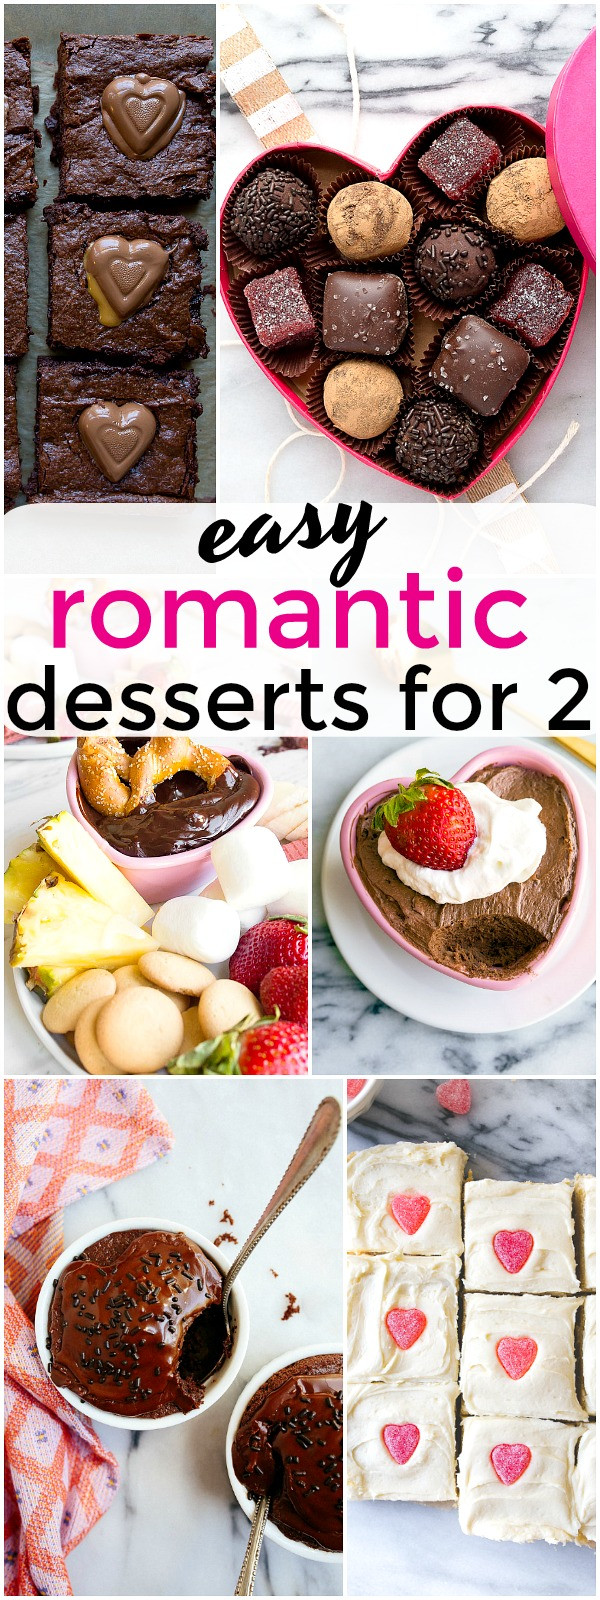 Easy Romantic Desserts For Two
 Easy Romantic Desserts for Two People on Valentine s Day